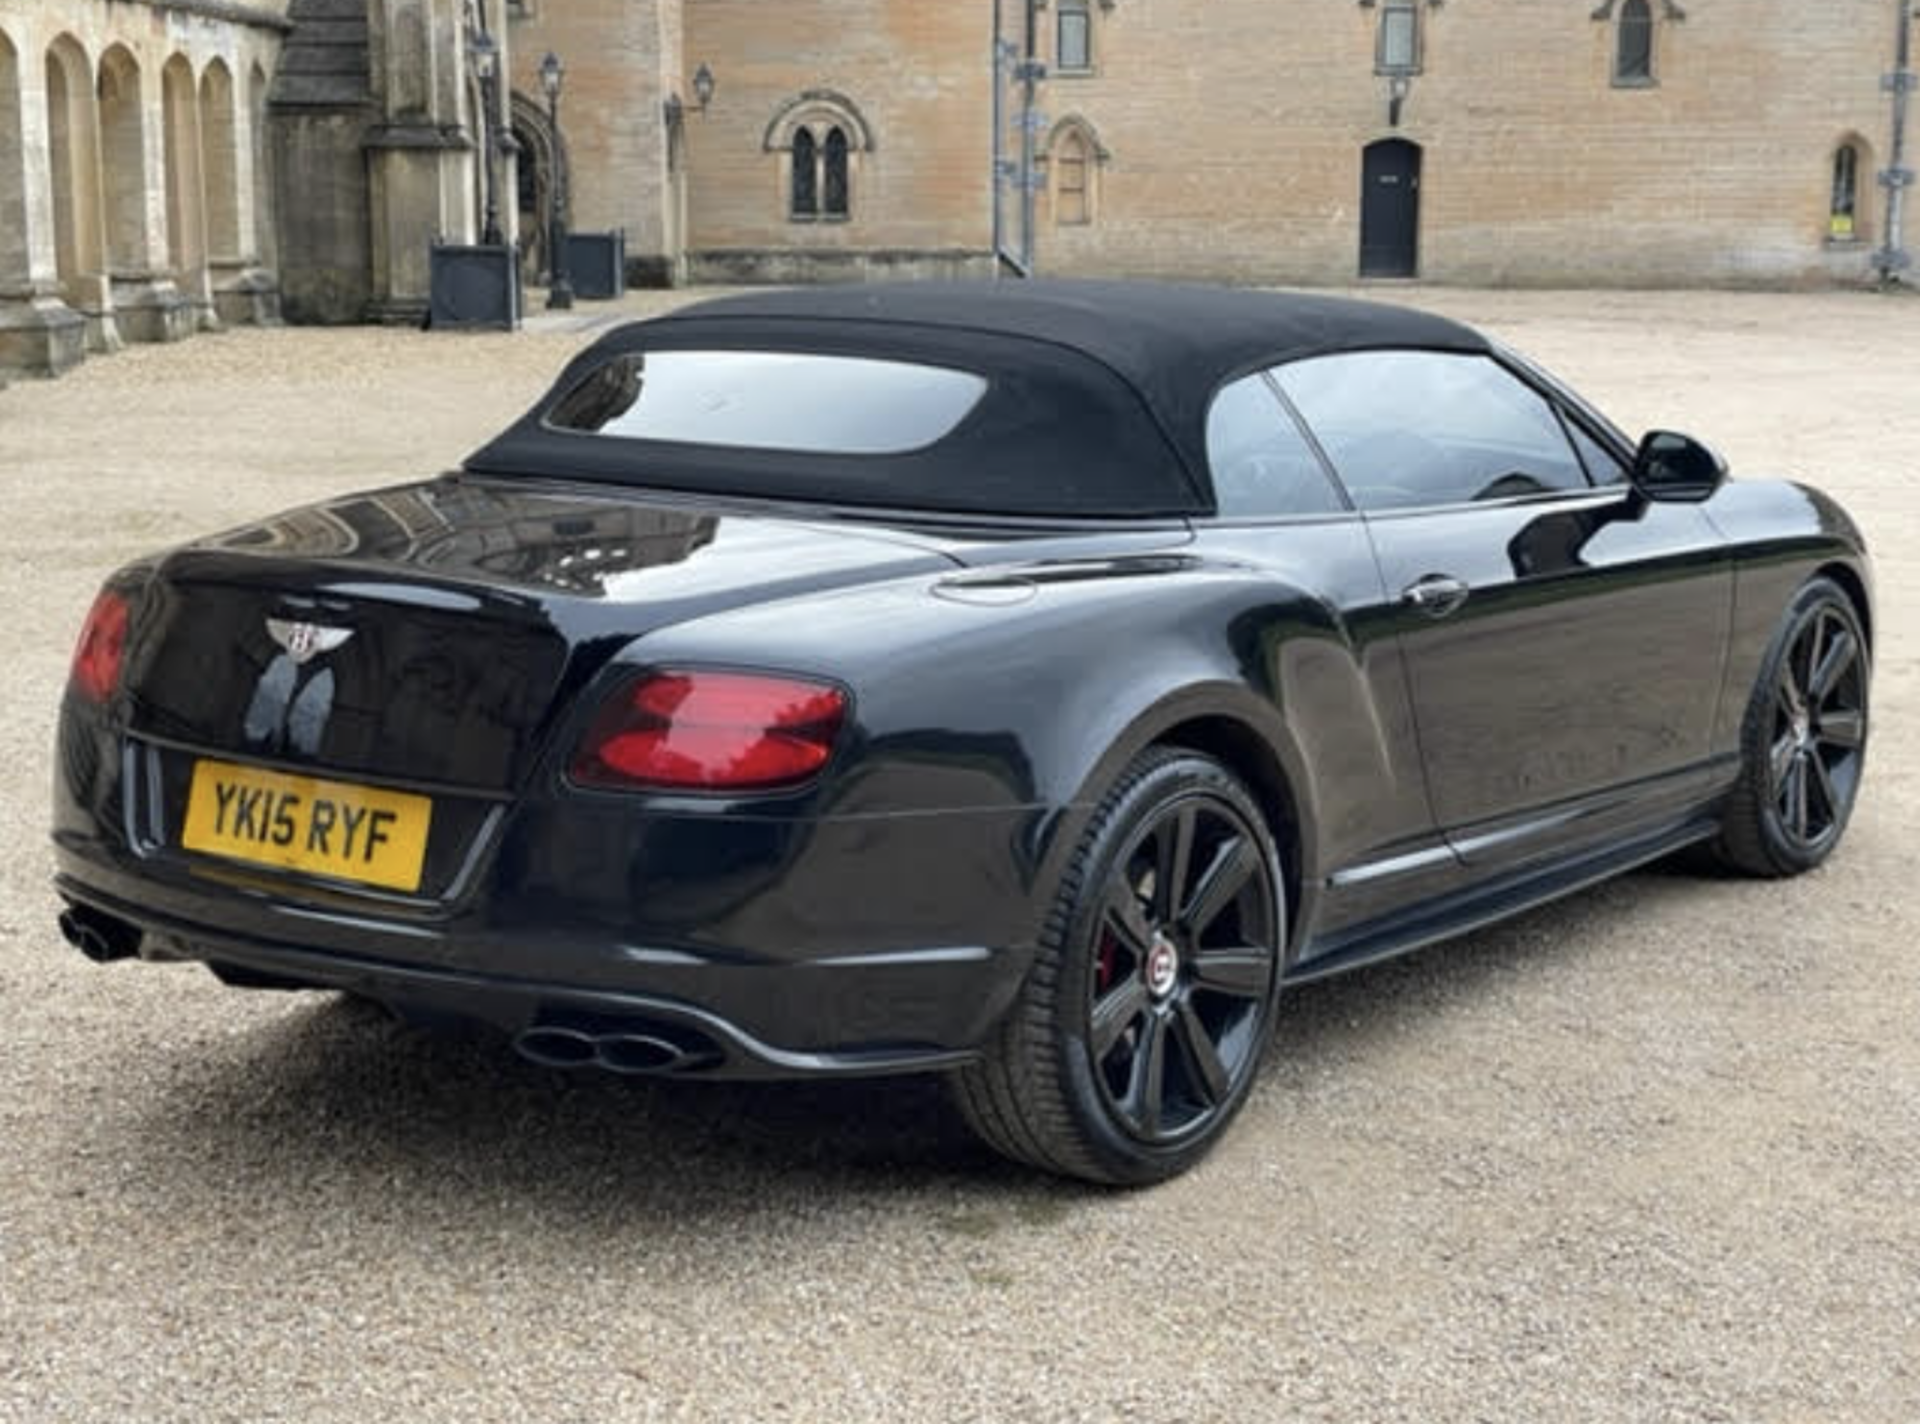 2015 Bentley Continental GTC 4.0 V8 S 2dr Auto Concourse series - Black pack 58,000 miles Full S/H - Image 7 of 18